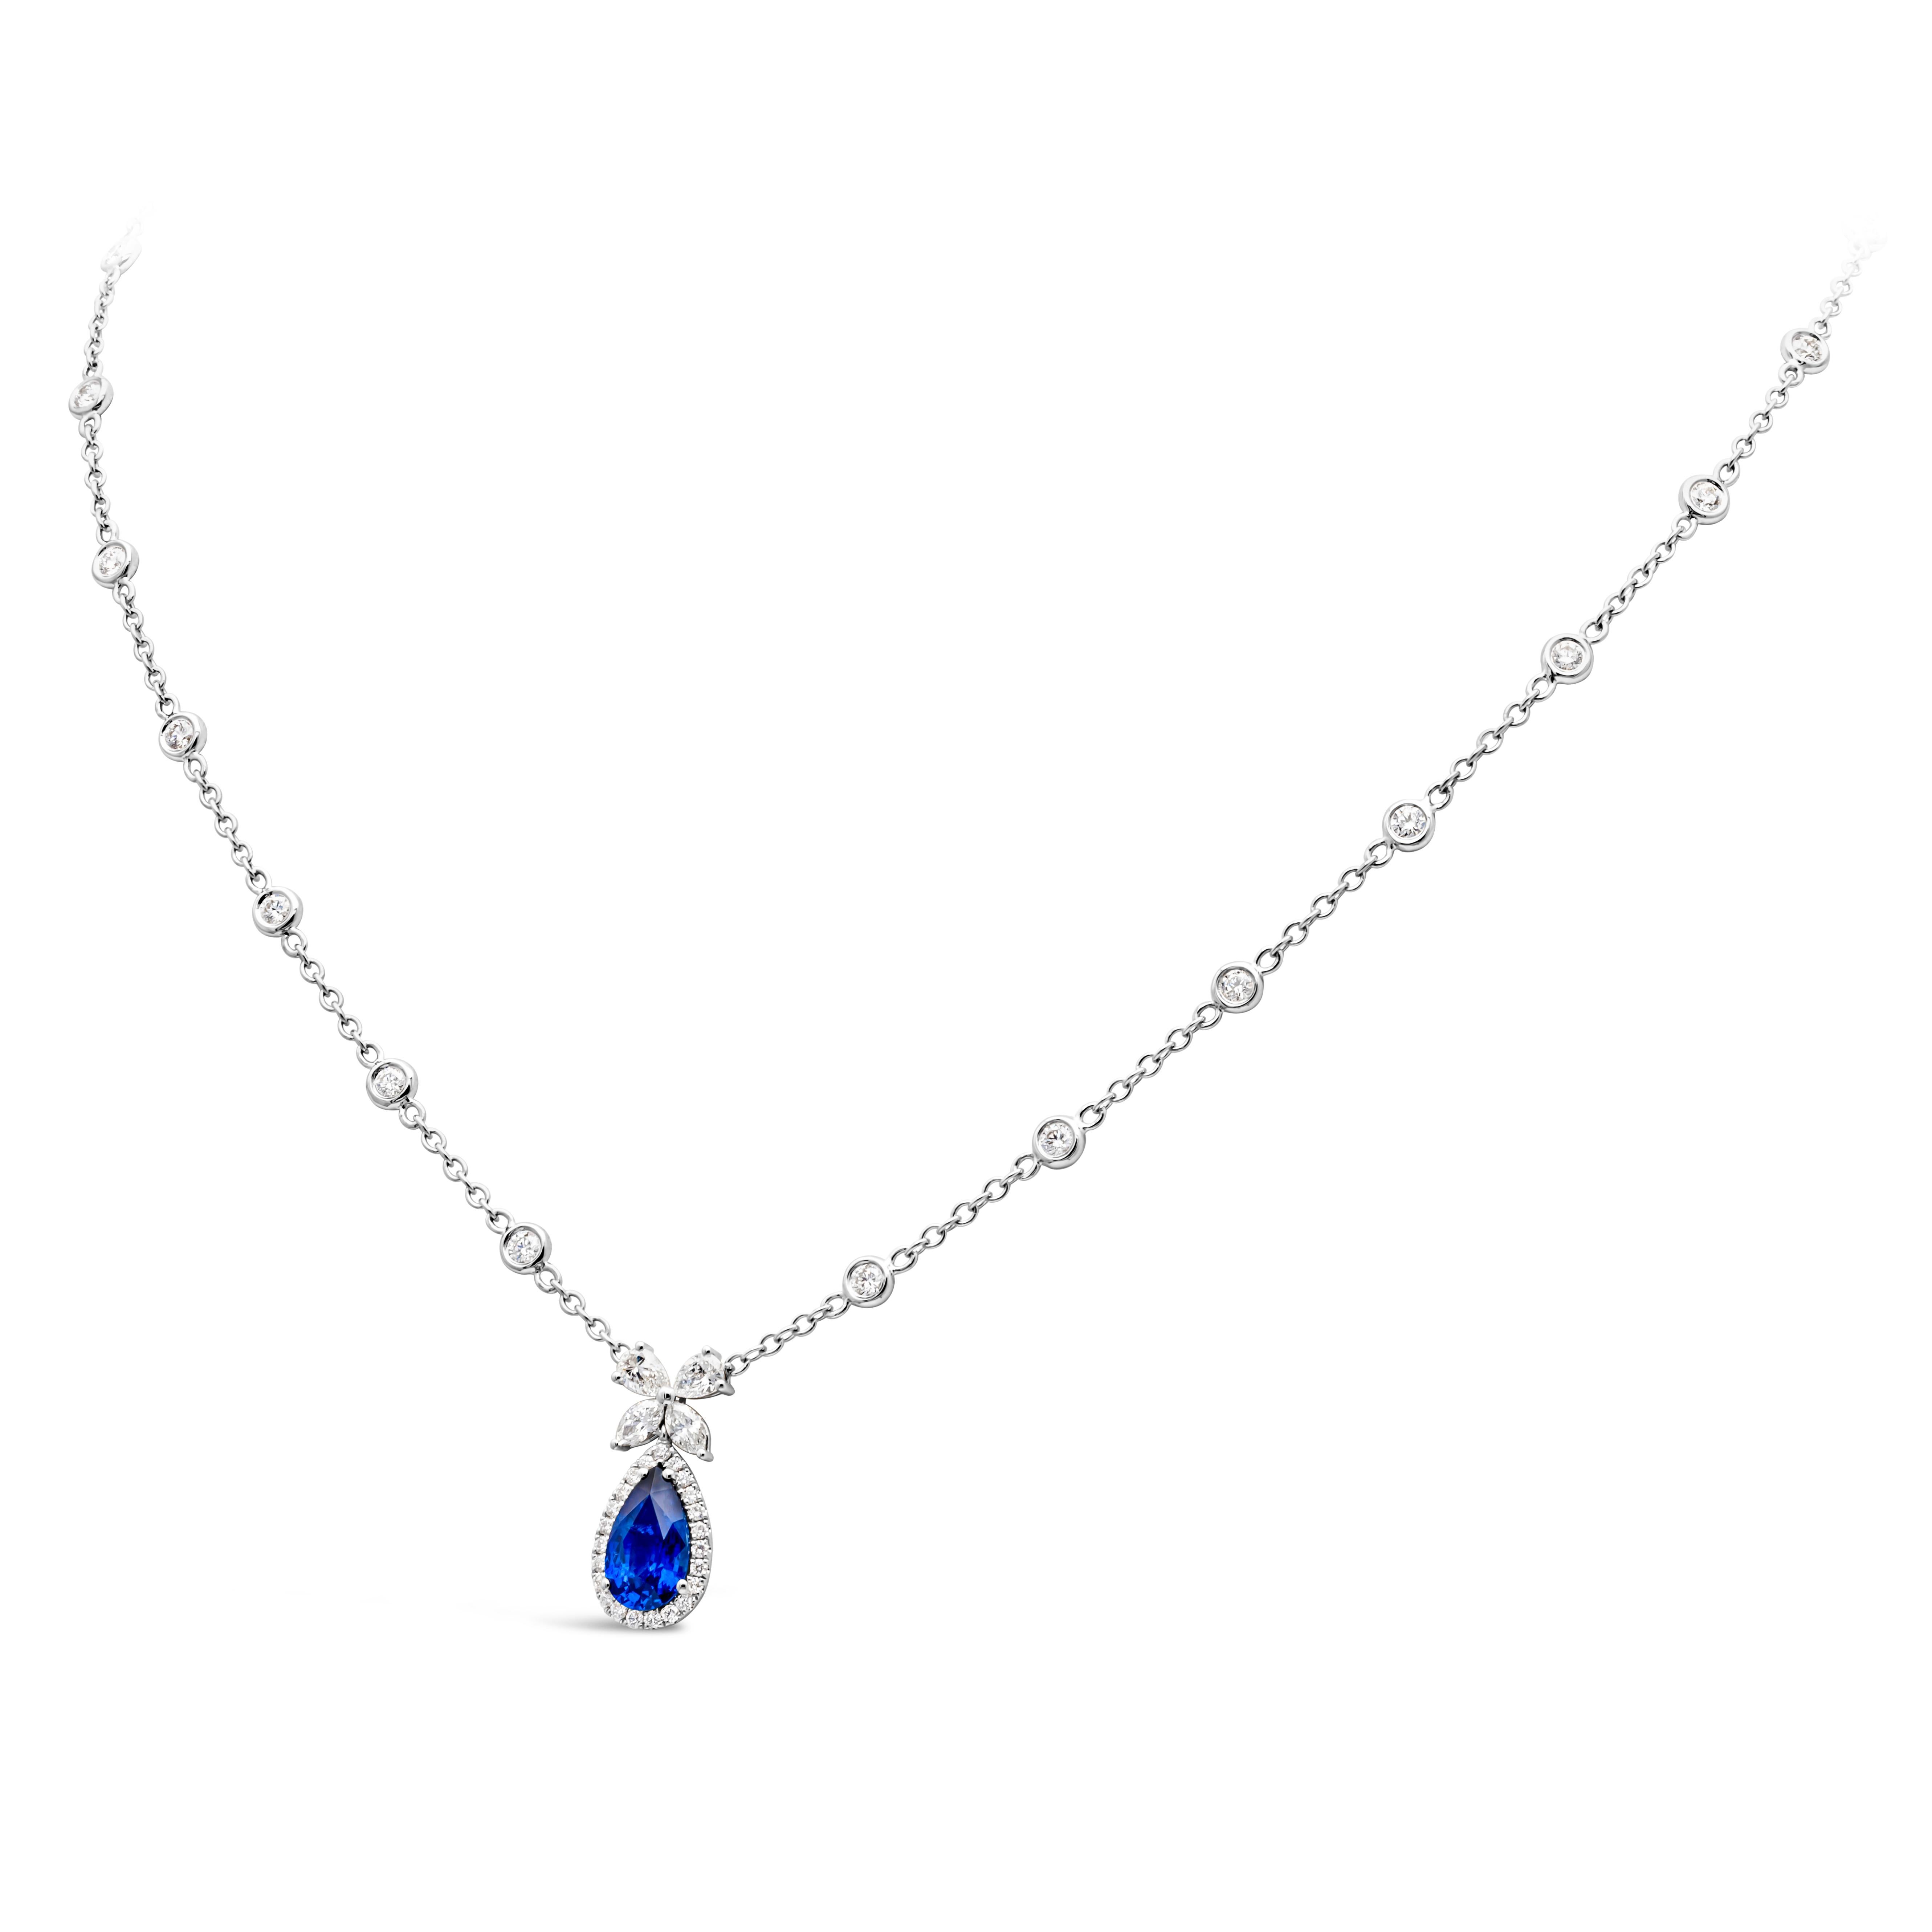 Contemporary 1.54 Carats Pear Shape Blue Sapphire and Mixed Diamond Pendant Necklace For Sale